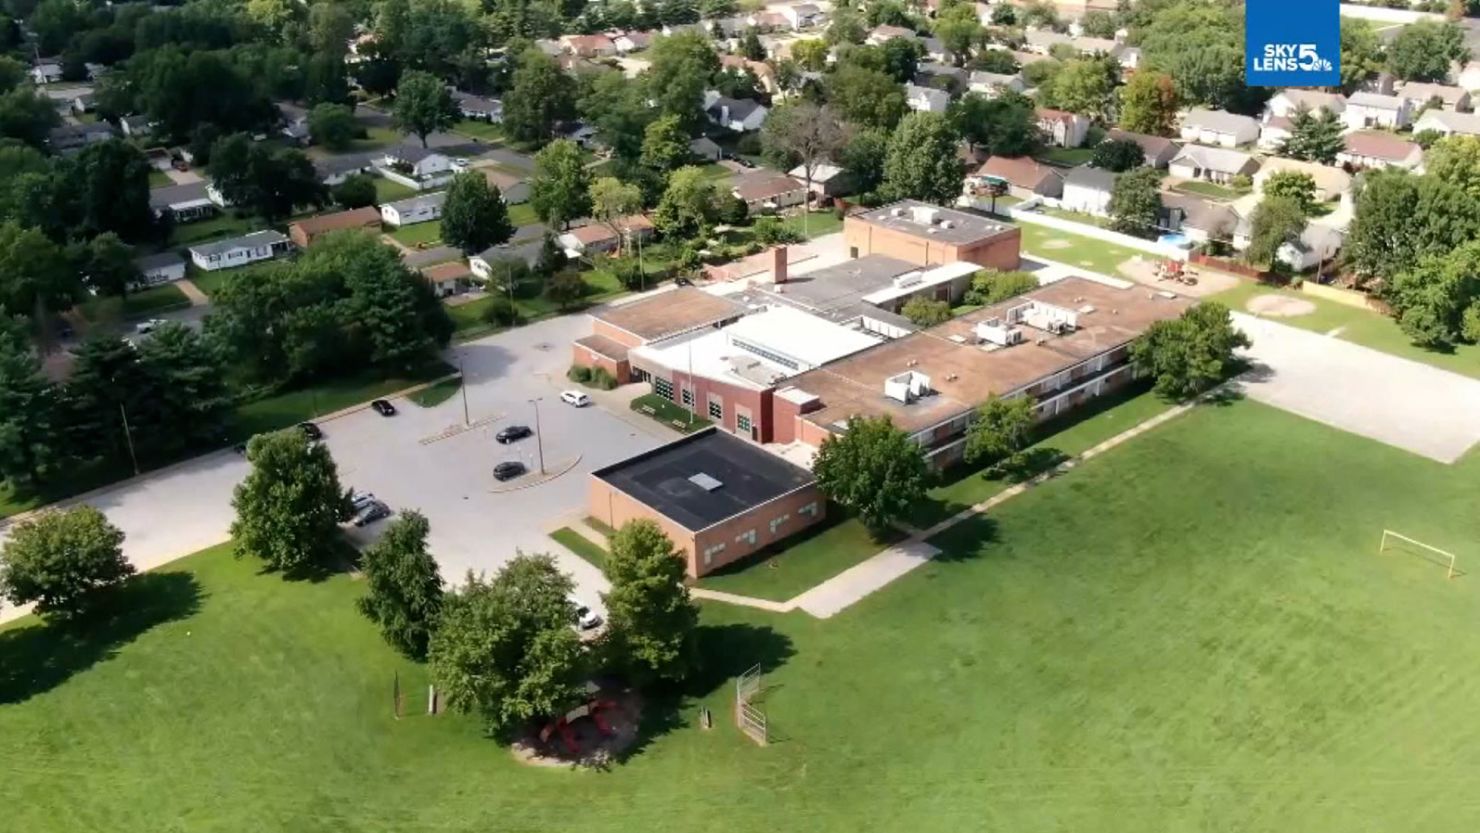 Jana Elementary School was found to have "unacceptable" levels of radioactive contamination.